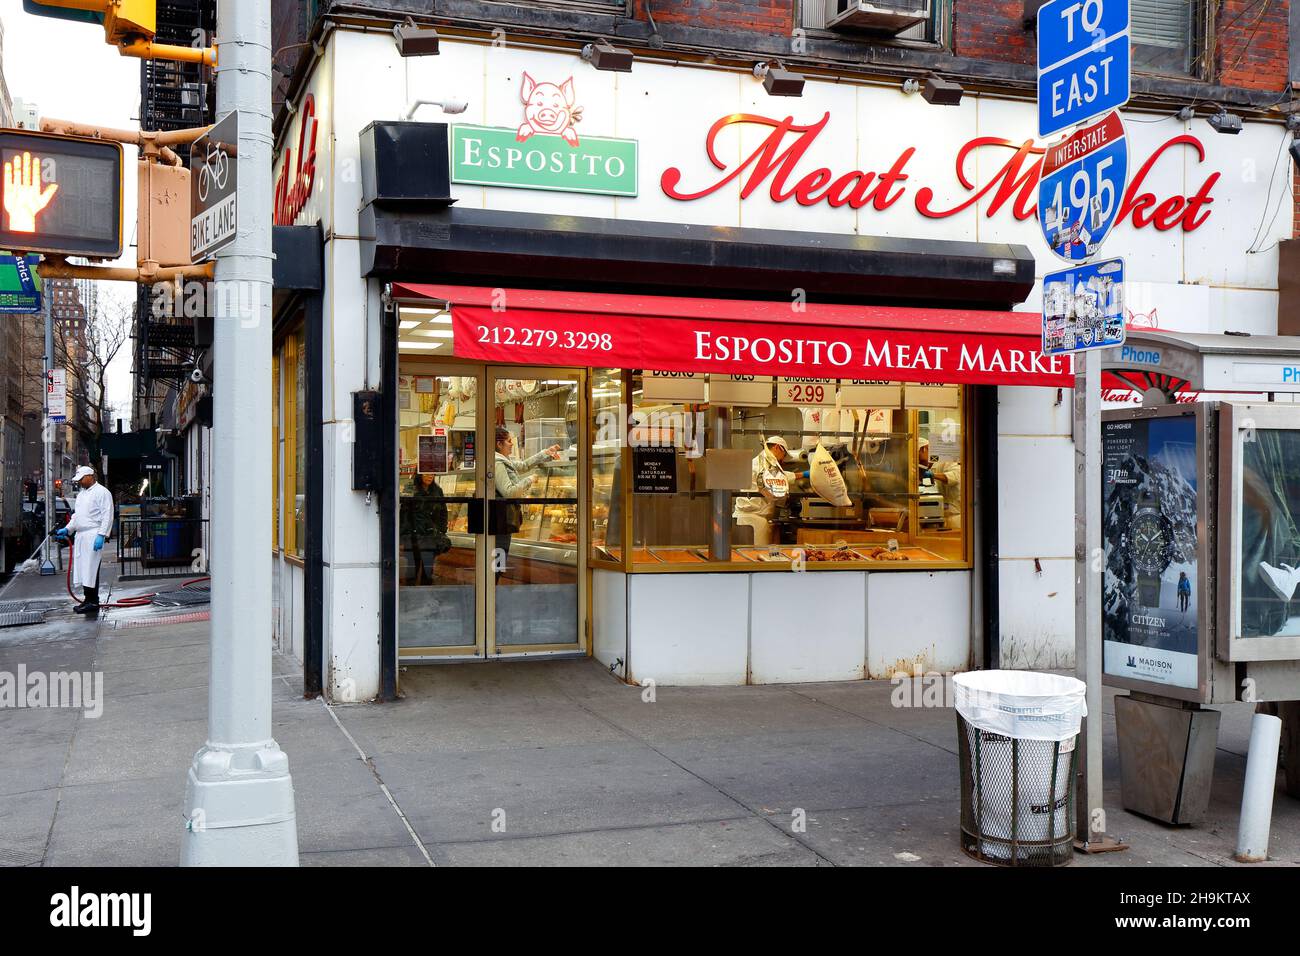 Esposito Meat Market 500 9th Ave New York Nyc Storefront Photo Of A Butcher Shop In The Hells Kitchengarment District Neighborhood Of Manhattan 2H9KTAX 